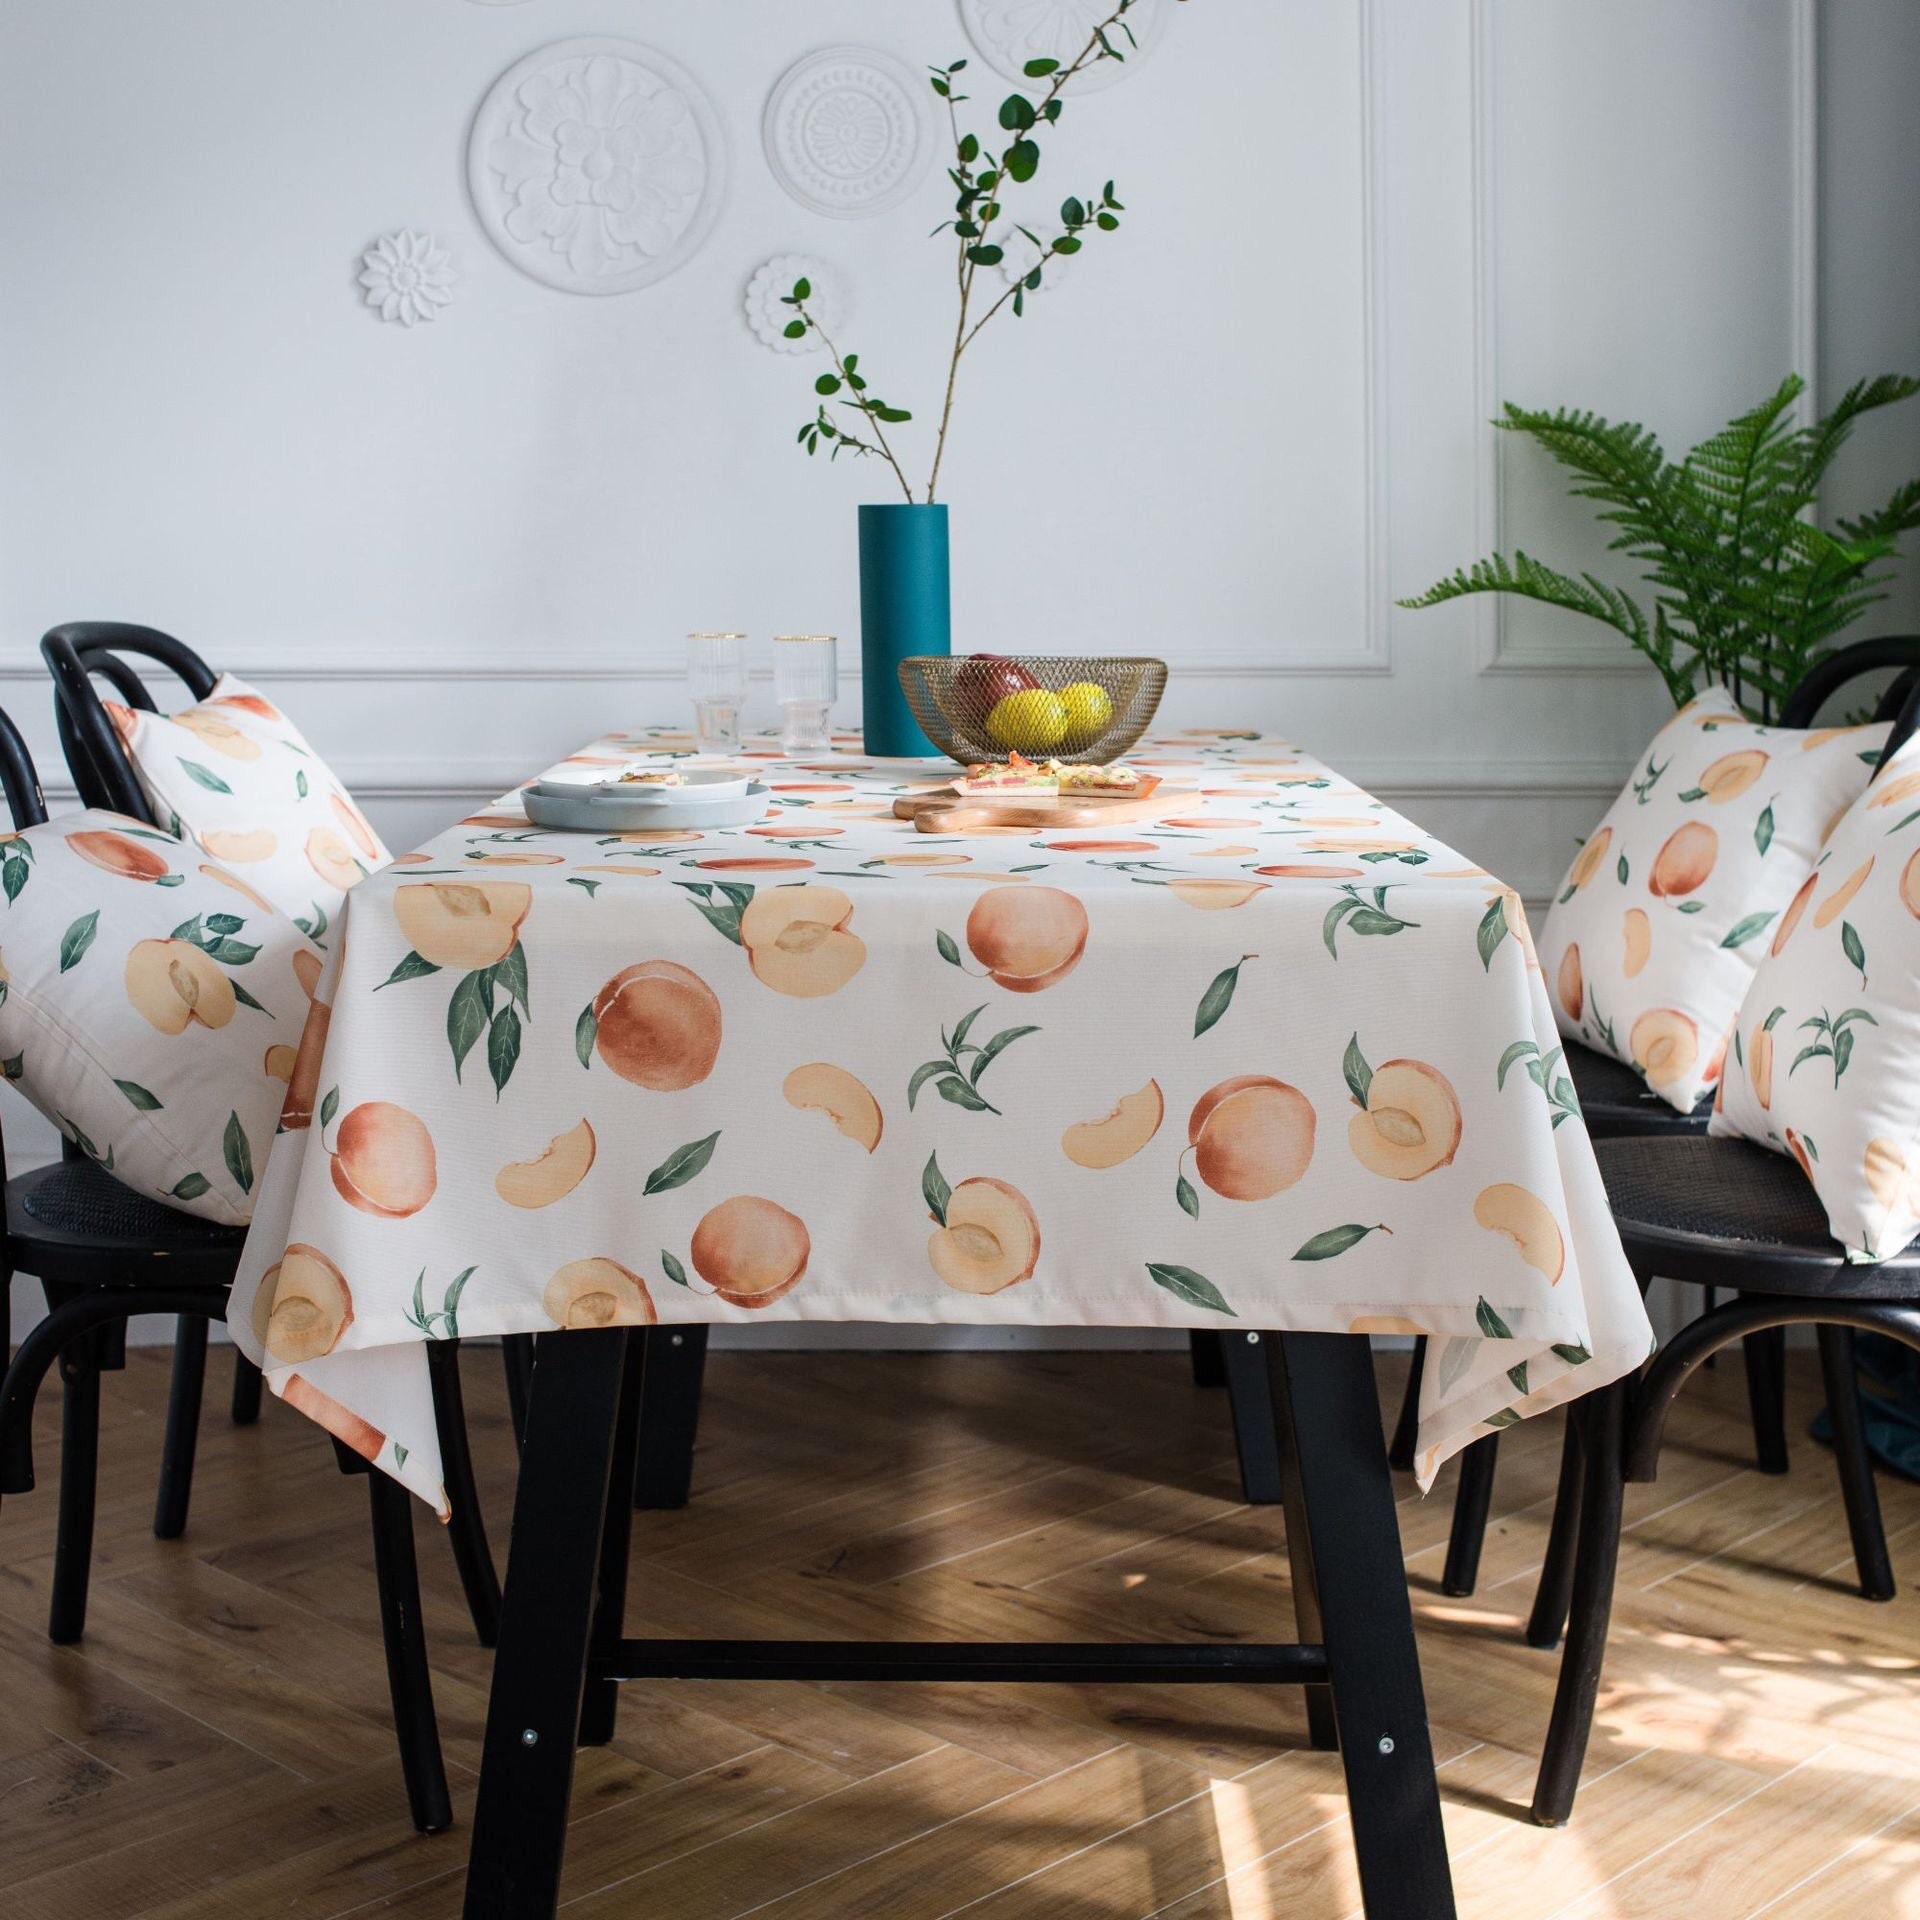 Yellow Peach Printing Linen Tablecloth Fabricfruit Table - Etsy